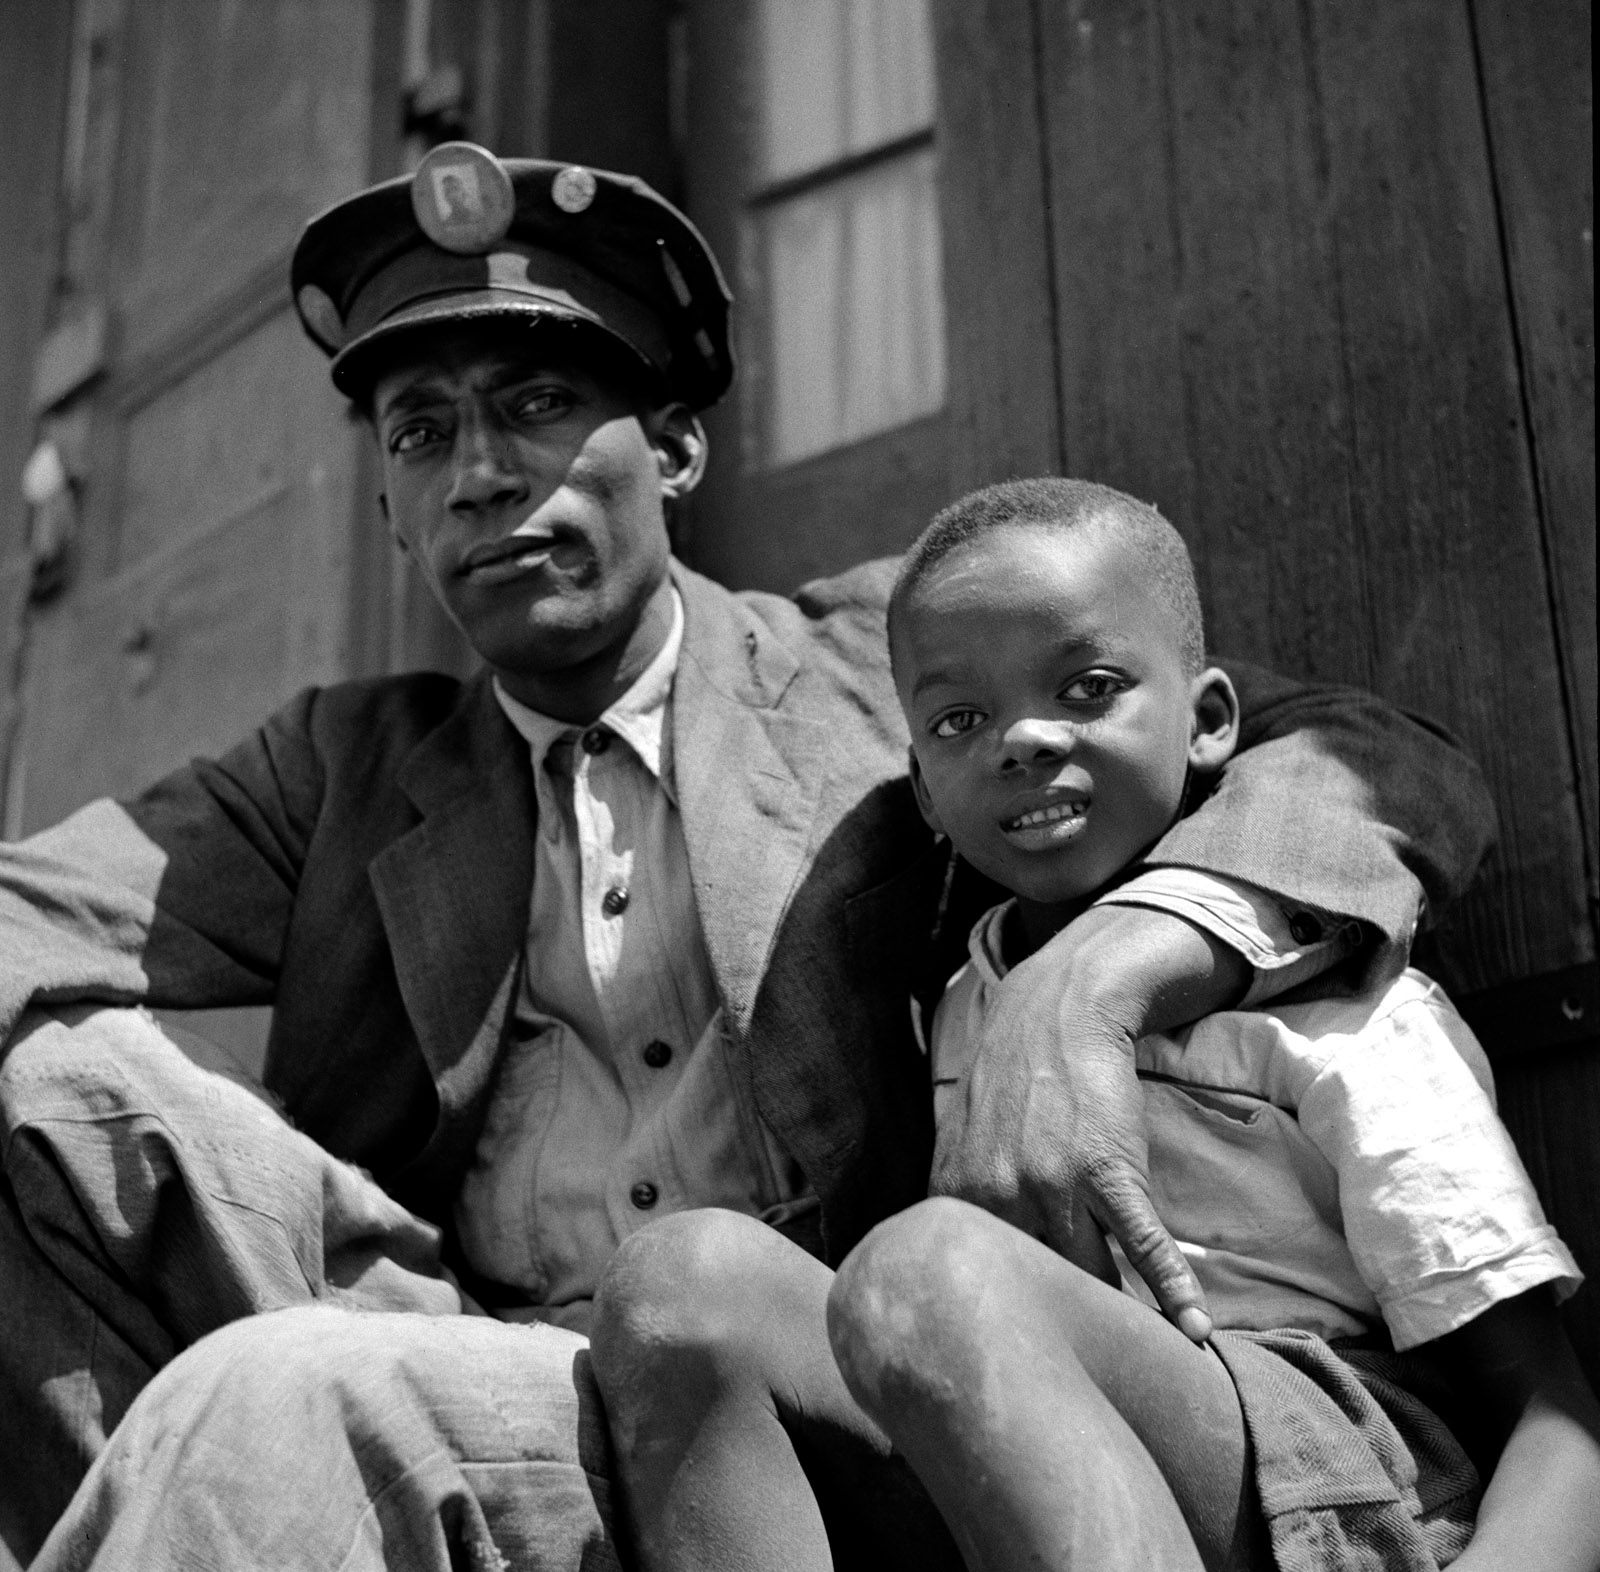 Dock worker and his son, New Orleans, March 1943